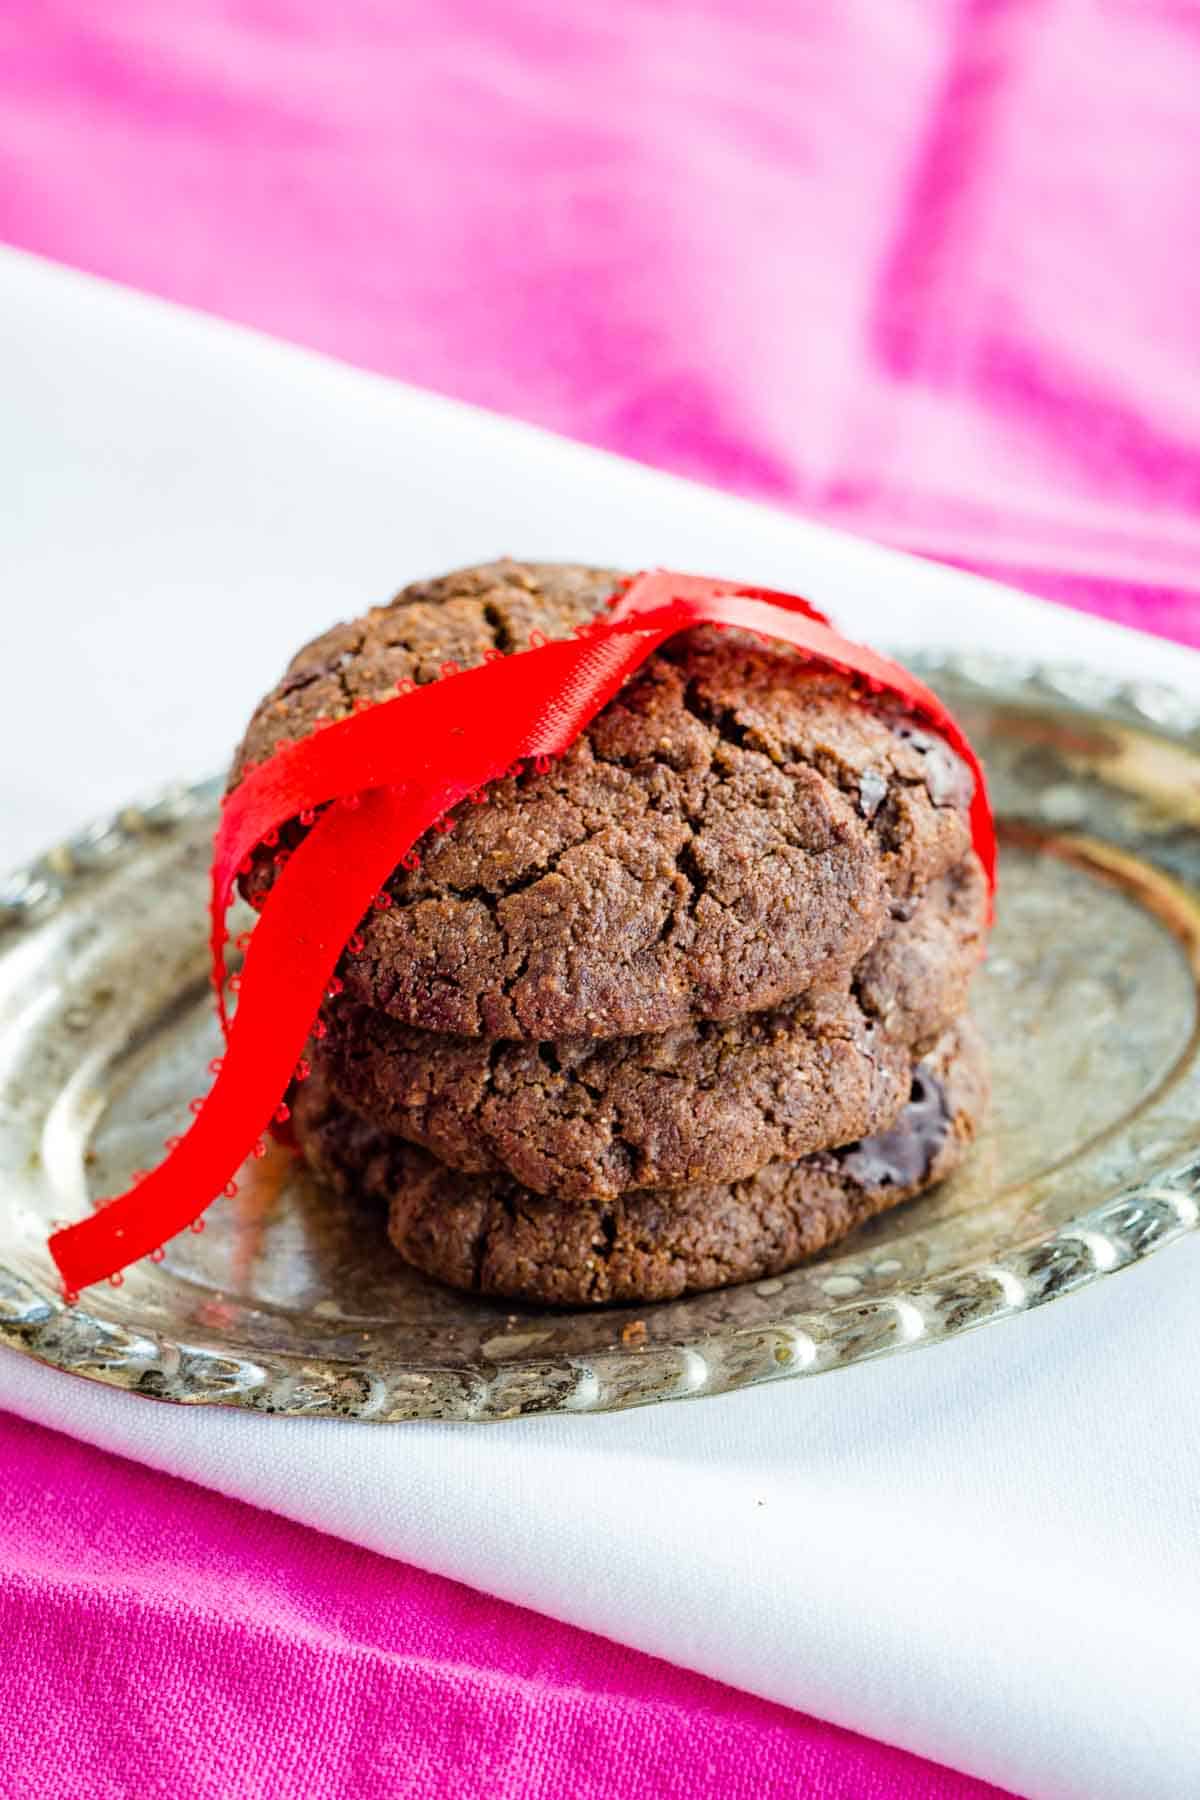 Three chocolate cookies are tied with a red ribbon on a plate.